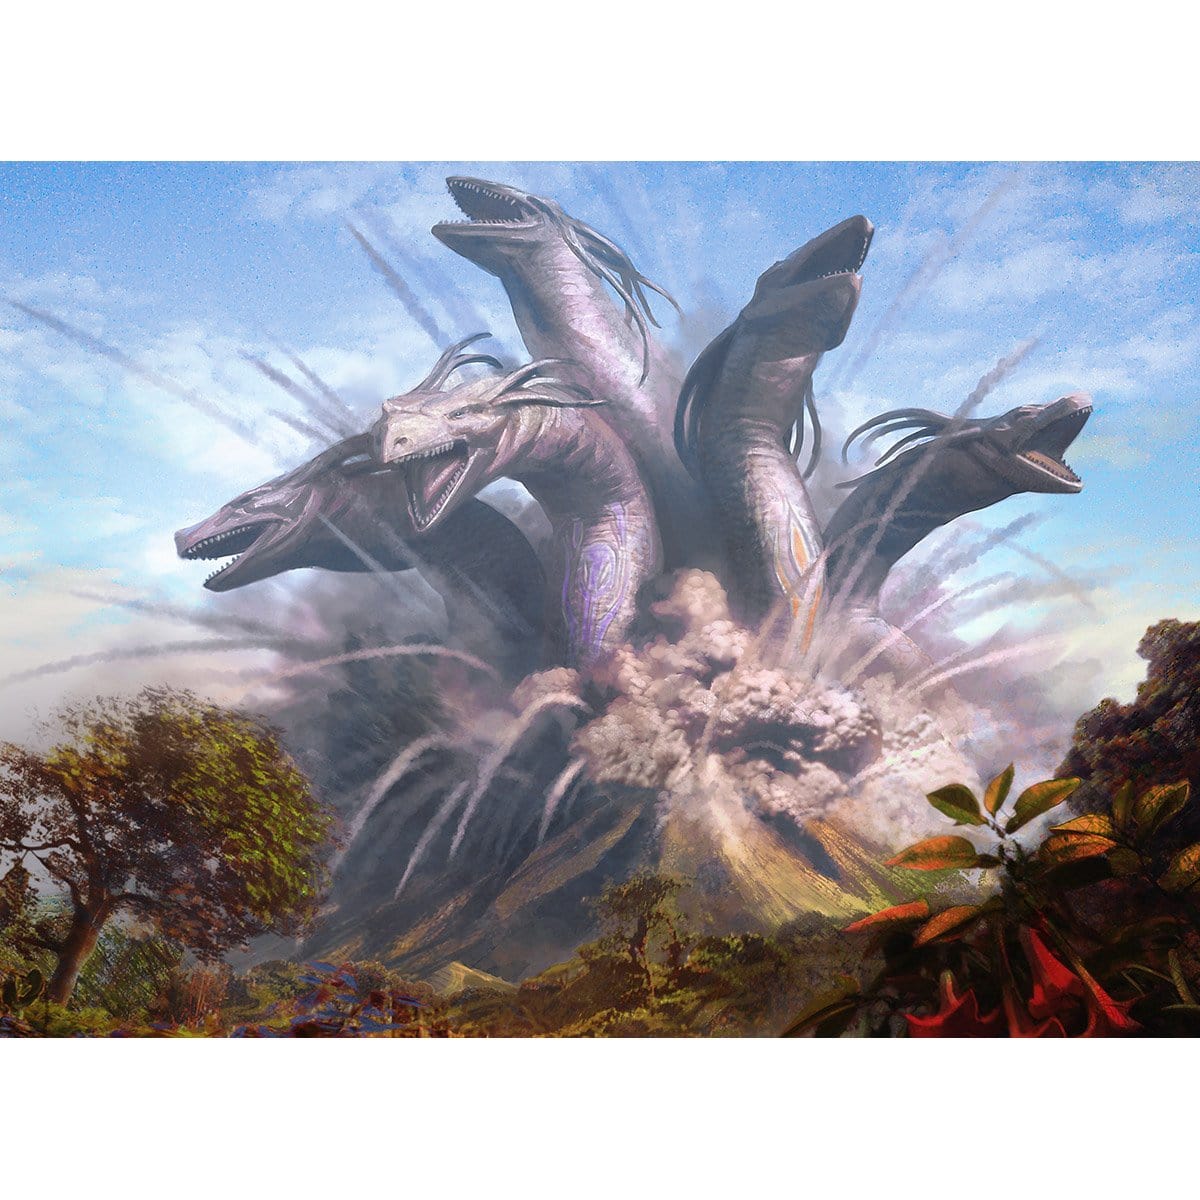 Progenitus Print - Print - Original Magic Art - Accessories for Magic the Gathering and other card games